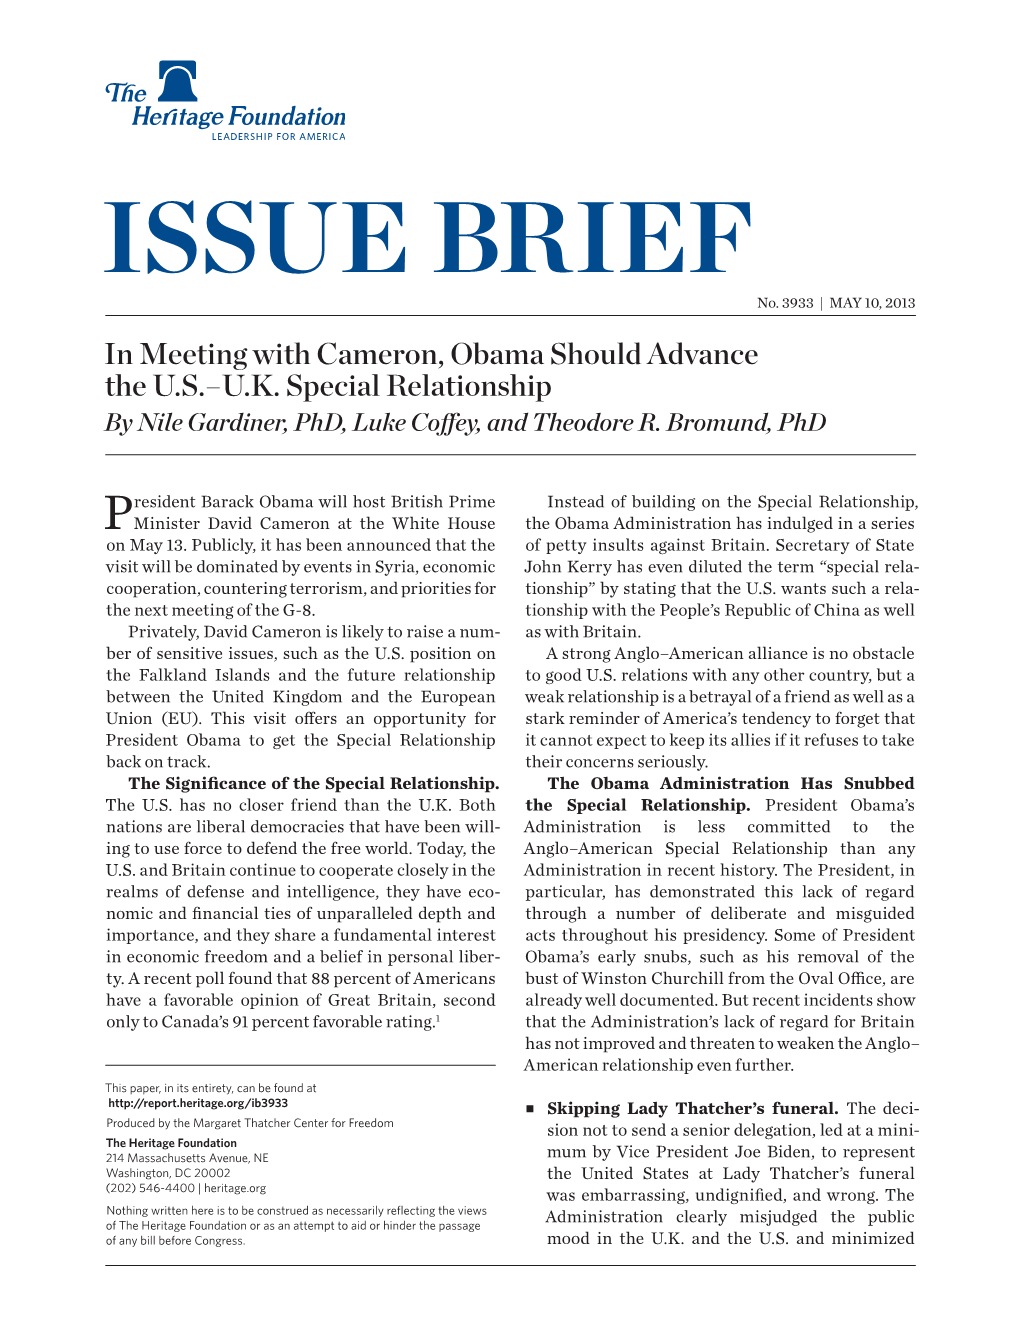 In Meeting with Cameron, Obama Should Advance the U.S.–U.K. Special Relationship by Nile Gardiner, Phd, Luke Coffey, and Theodore R